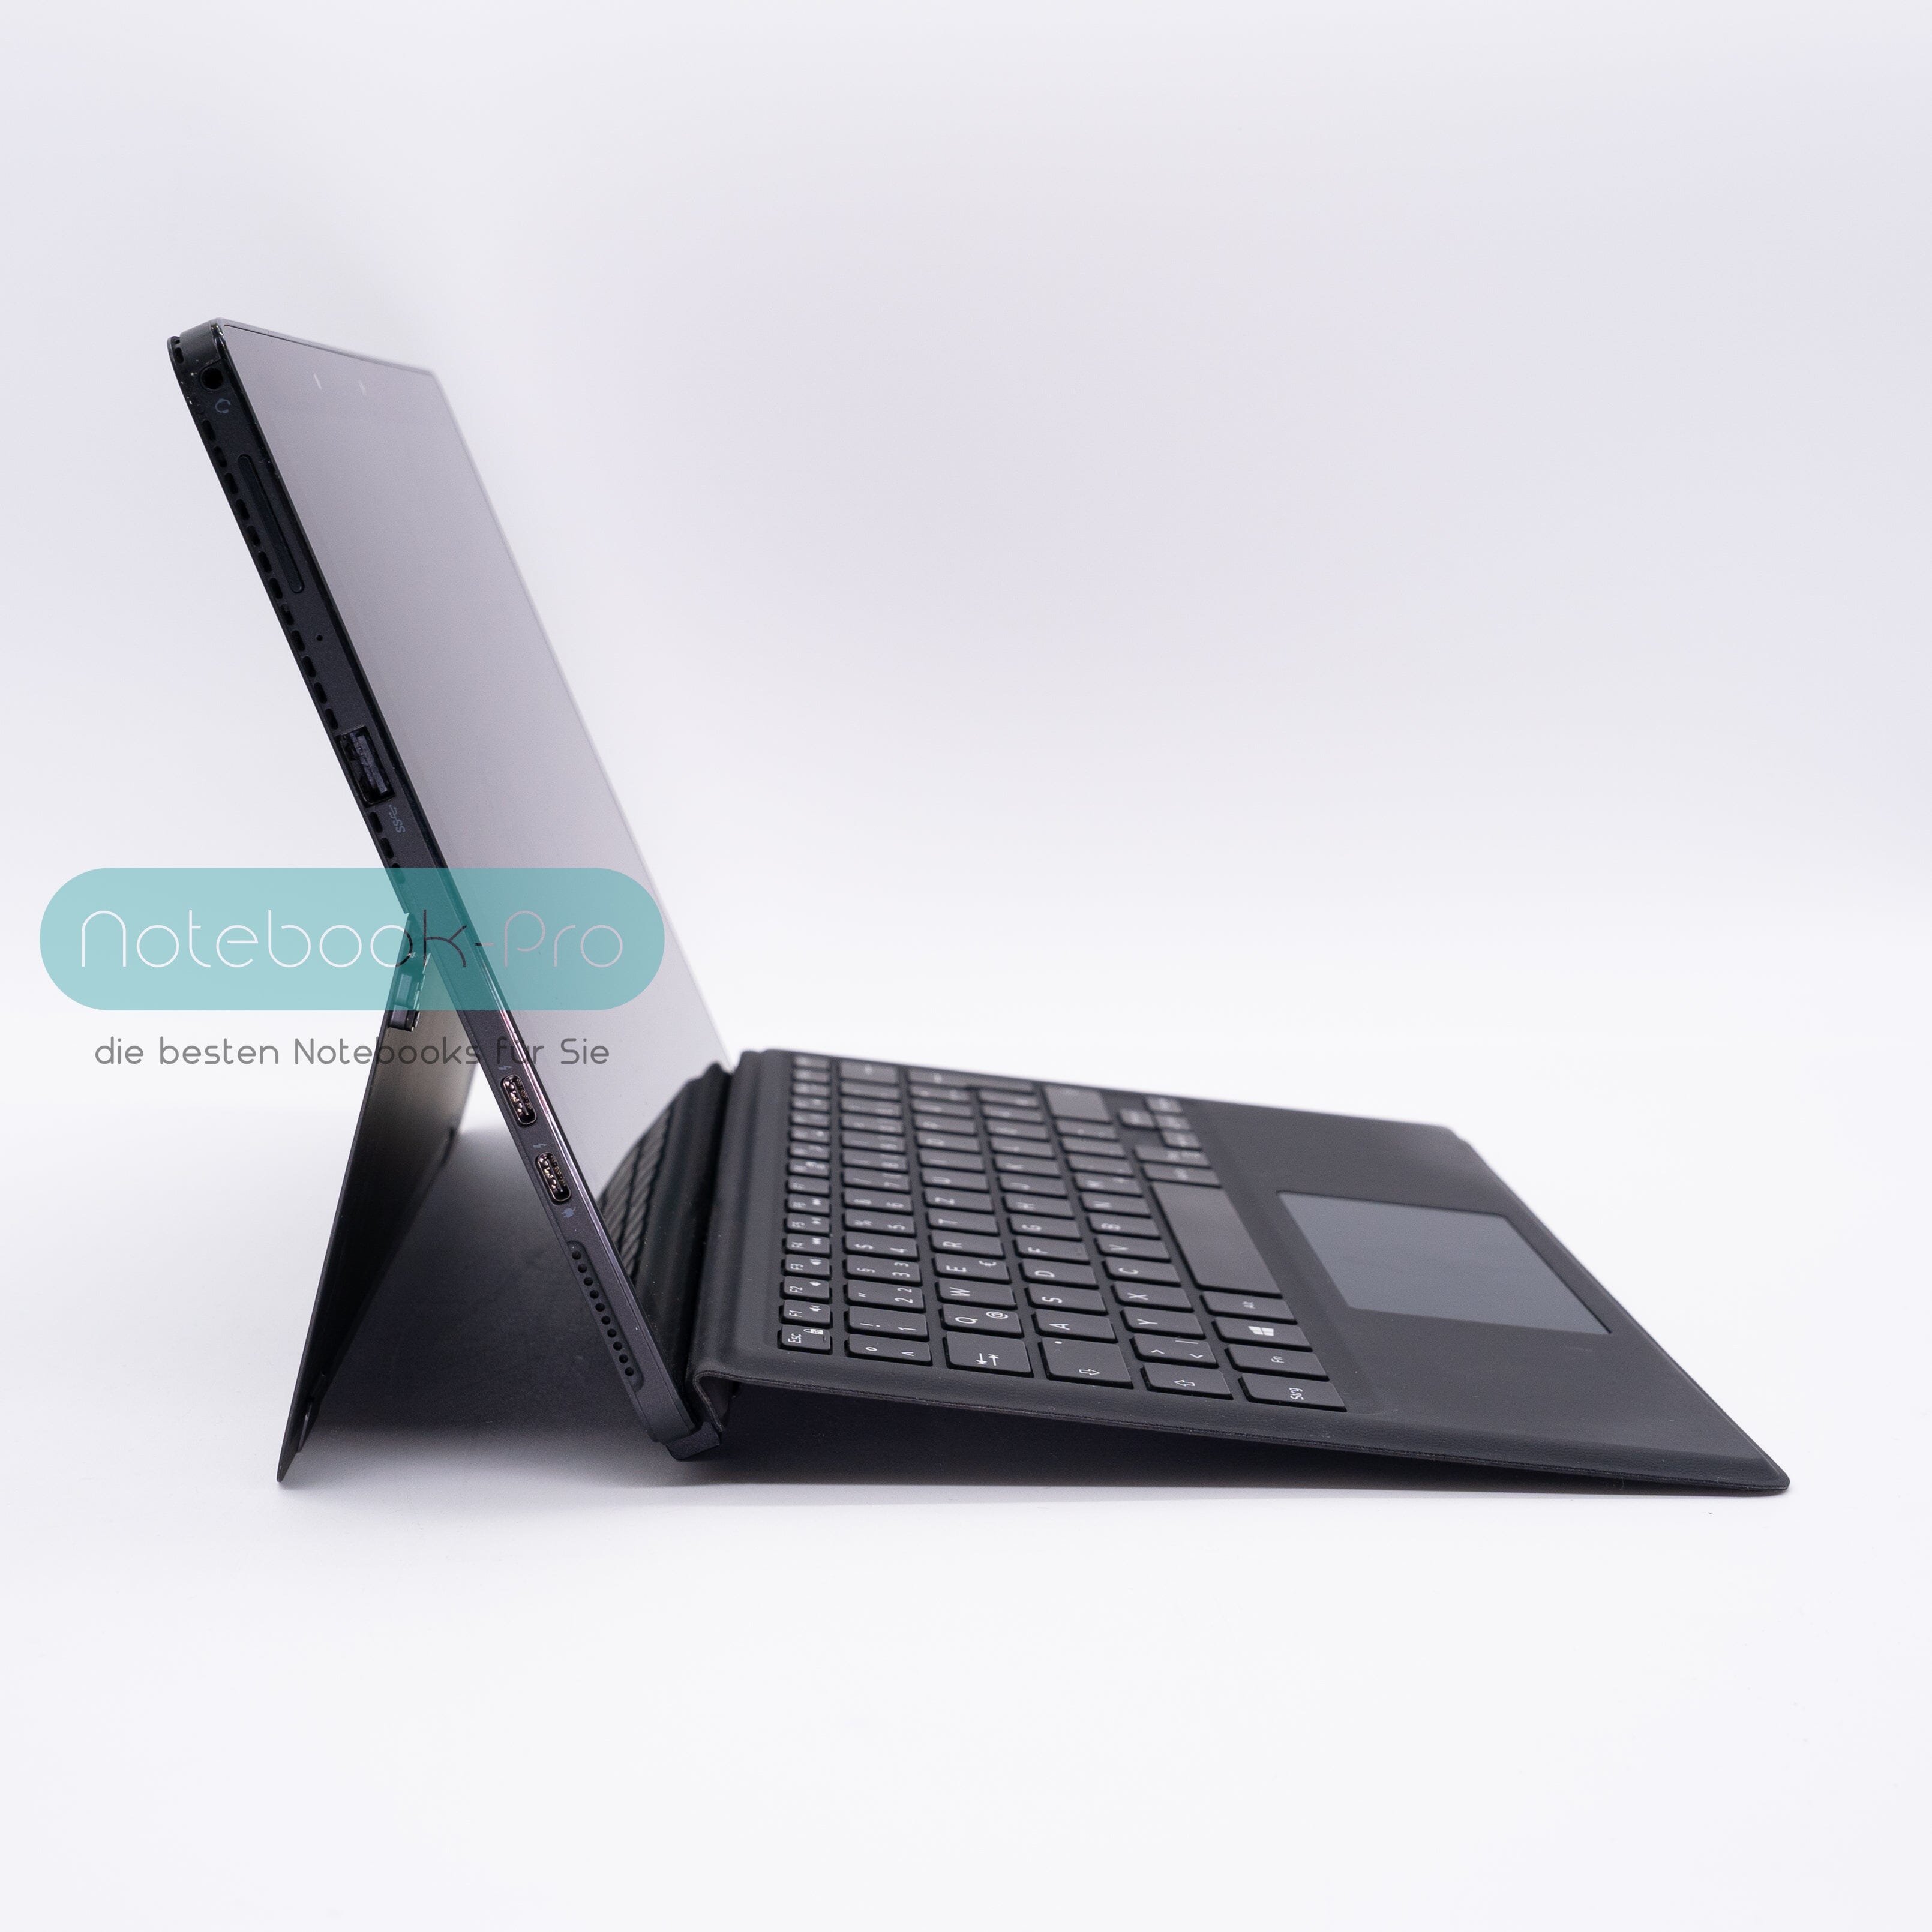 Dell Latitude 5290 2-in-1 i7-8650U TOUCH 16GB RAM 512GB NVMe SSD Laptops Notebook-Pro 